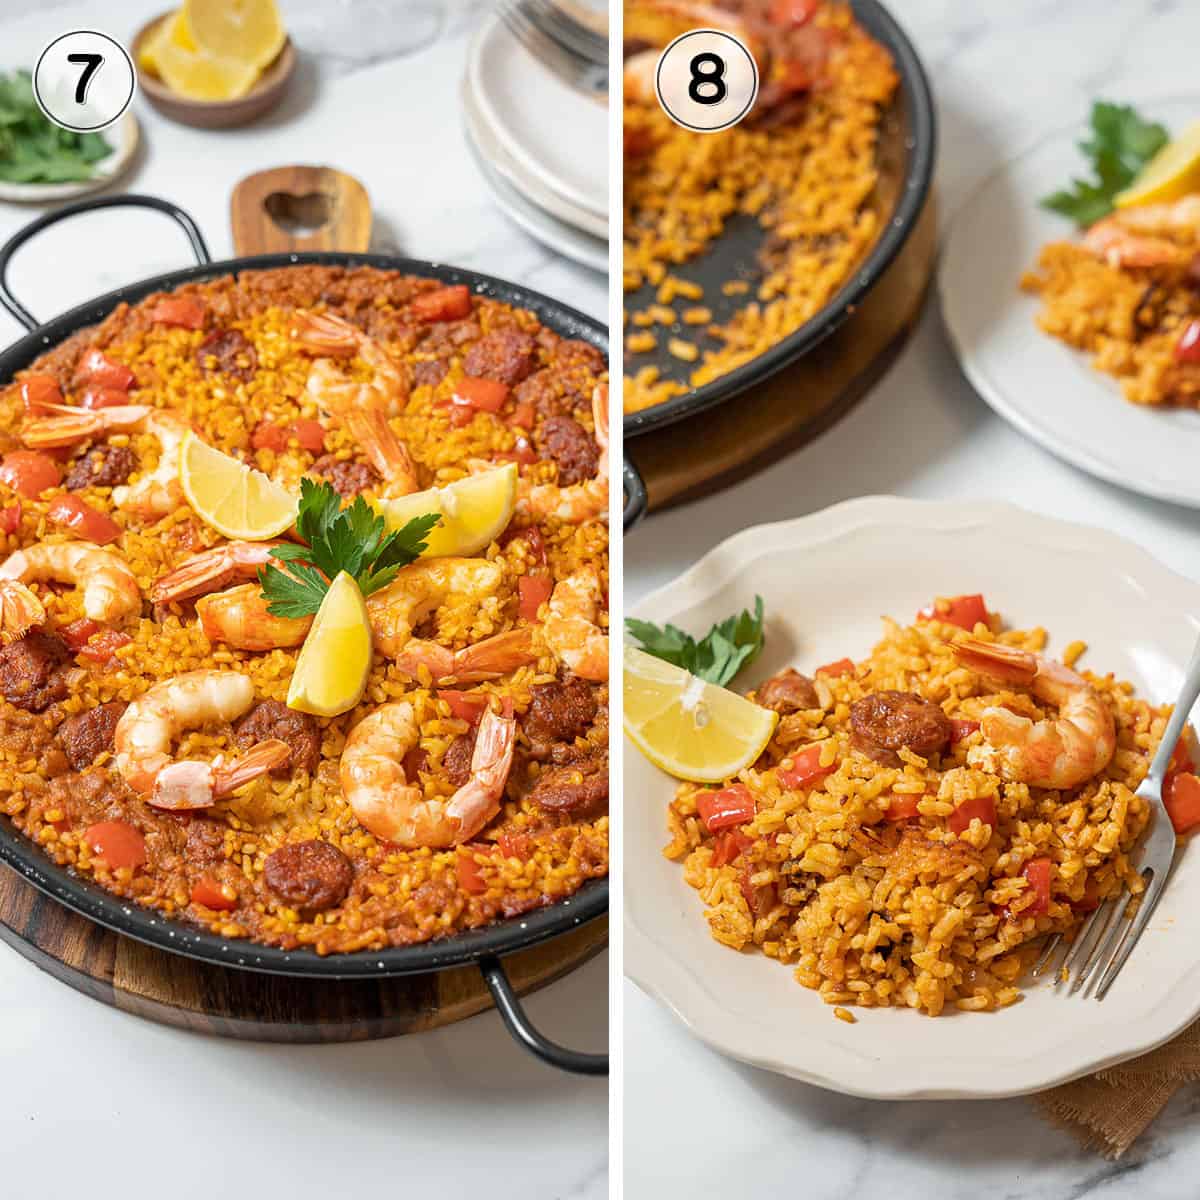 cooking and serving the prawn and chorizo paella.